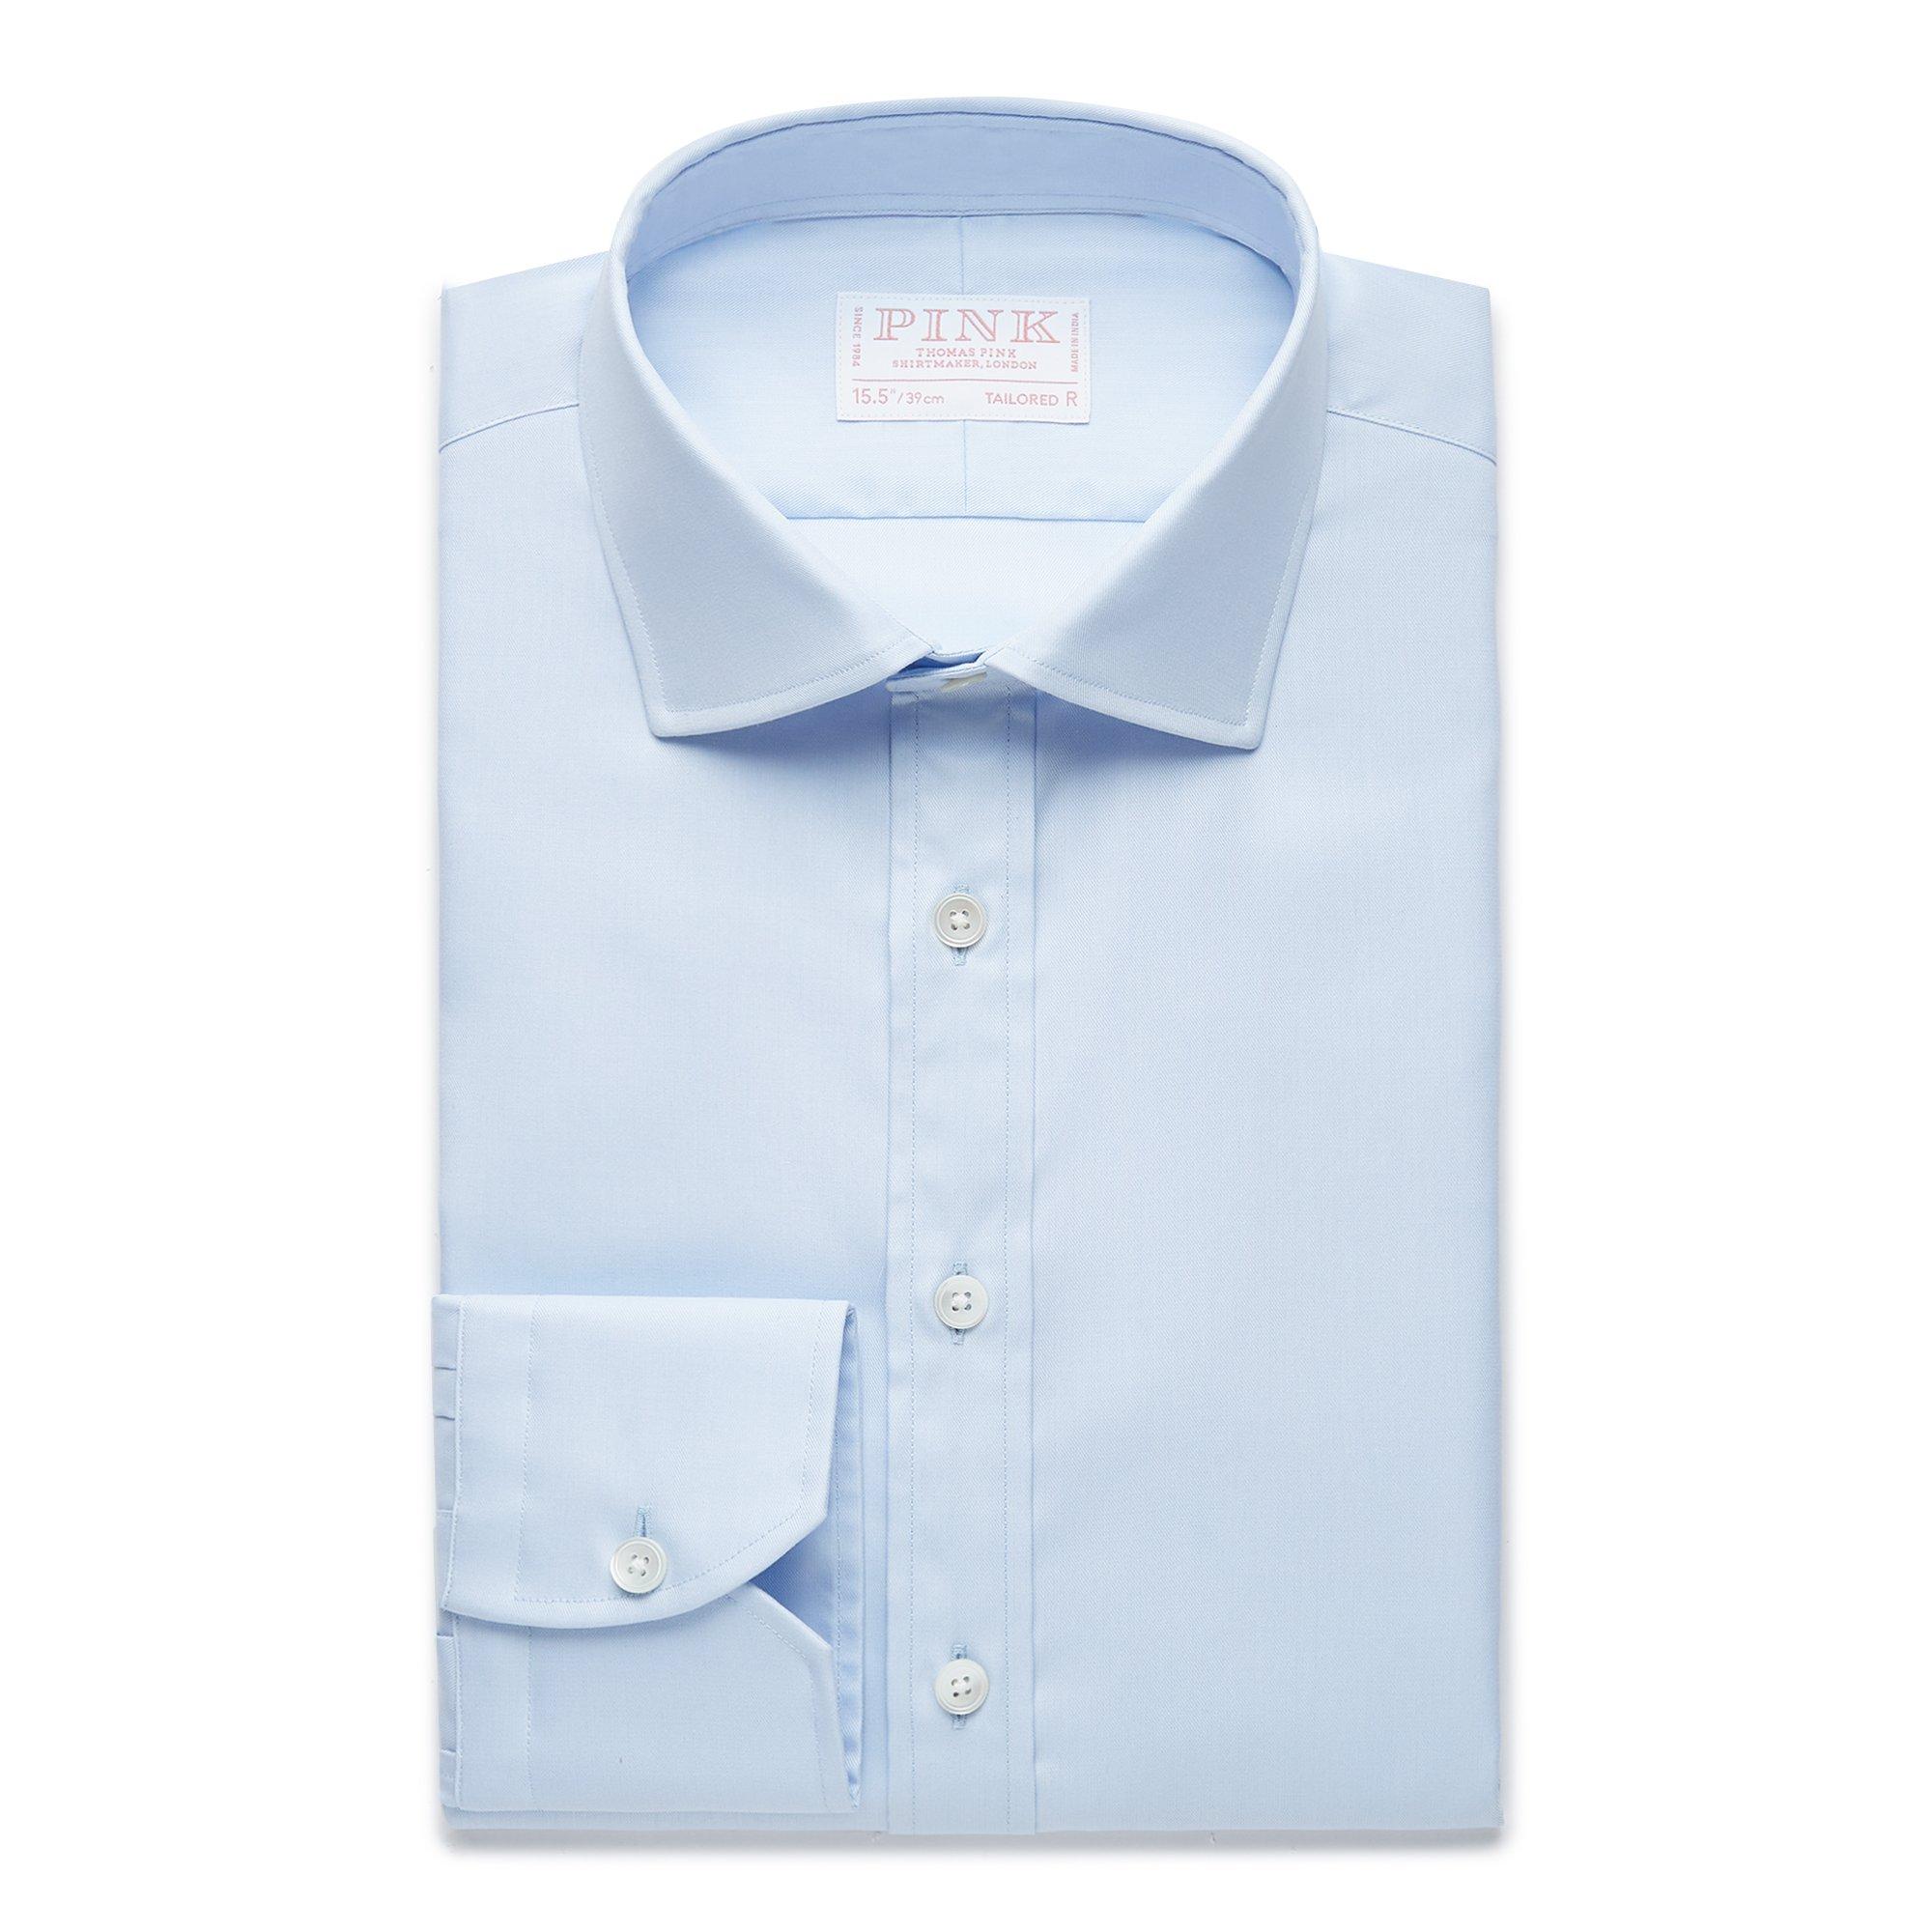 Wardrobe Must-haves  Explore our Essential Shirts - Thomas Pink